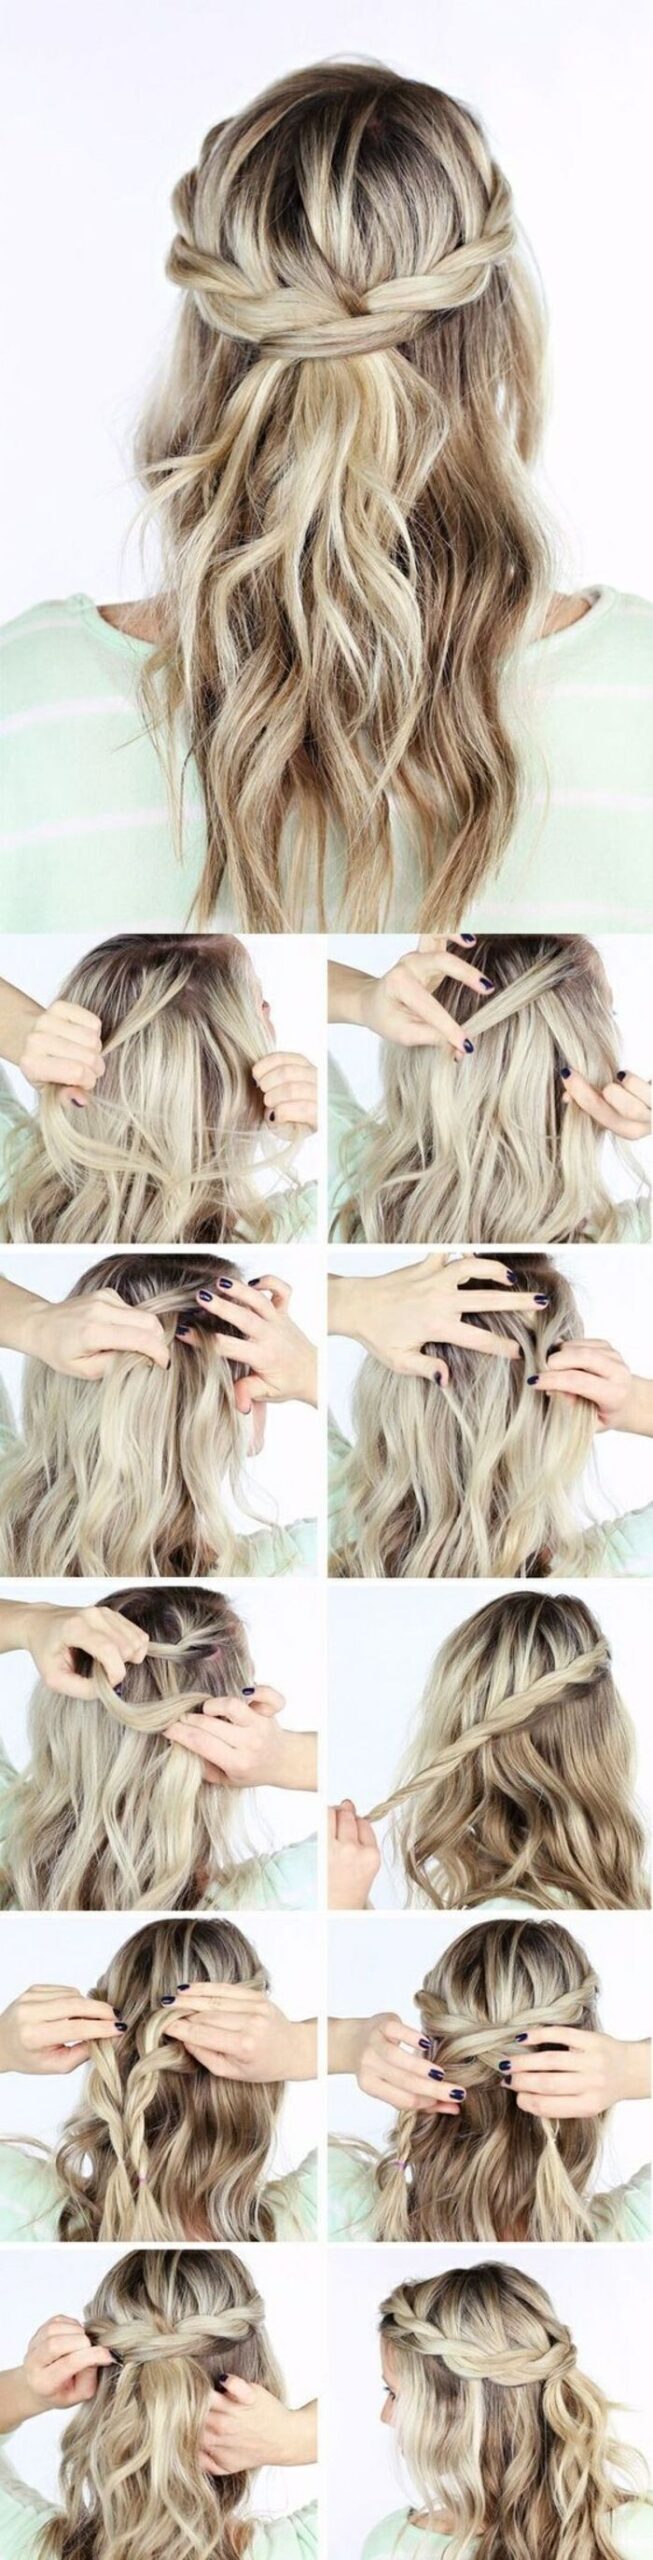 ▷ 1001+ Ideas and instructions on how to make braided hairstyles yourself